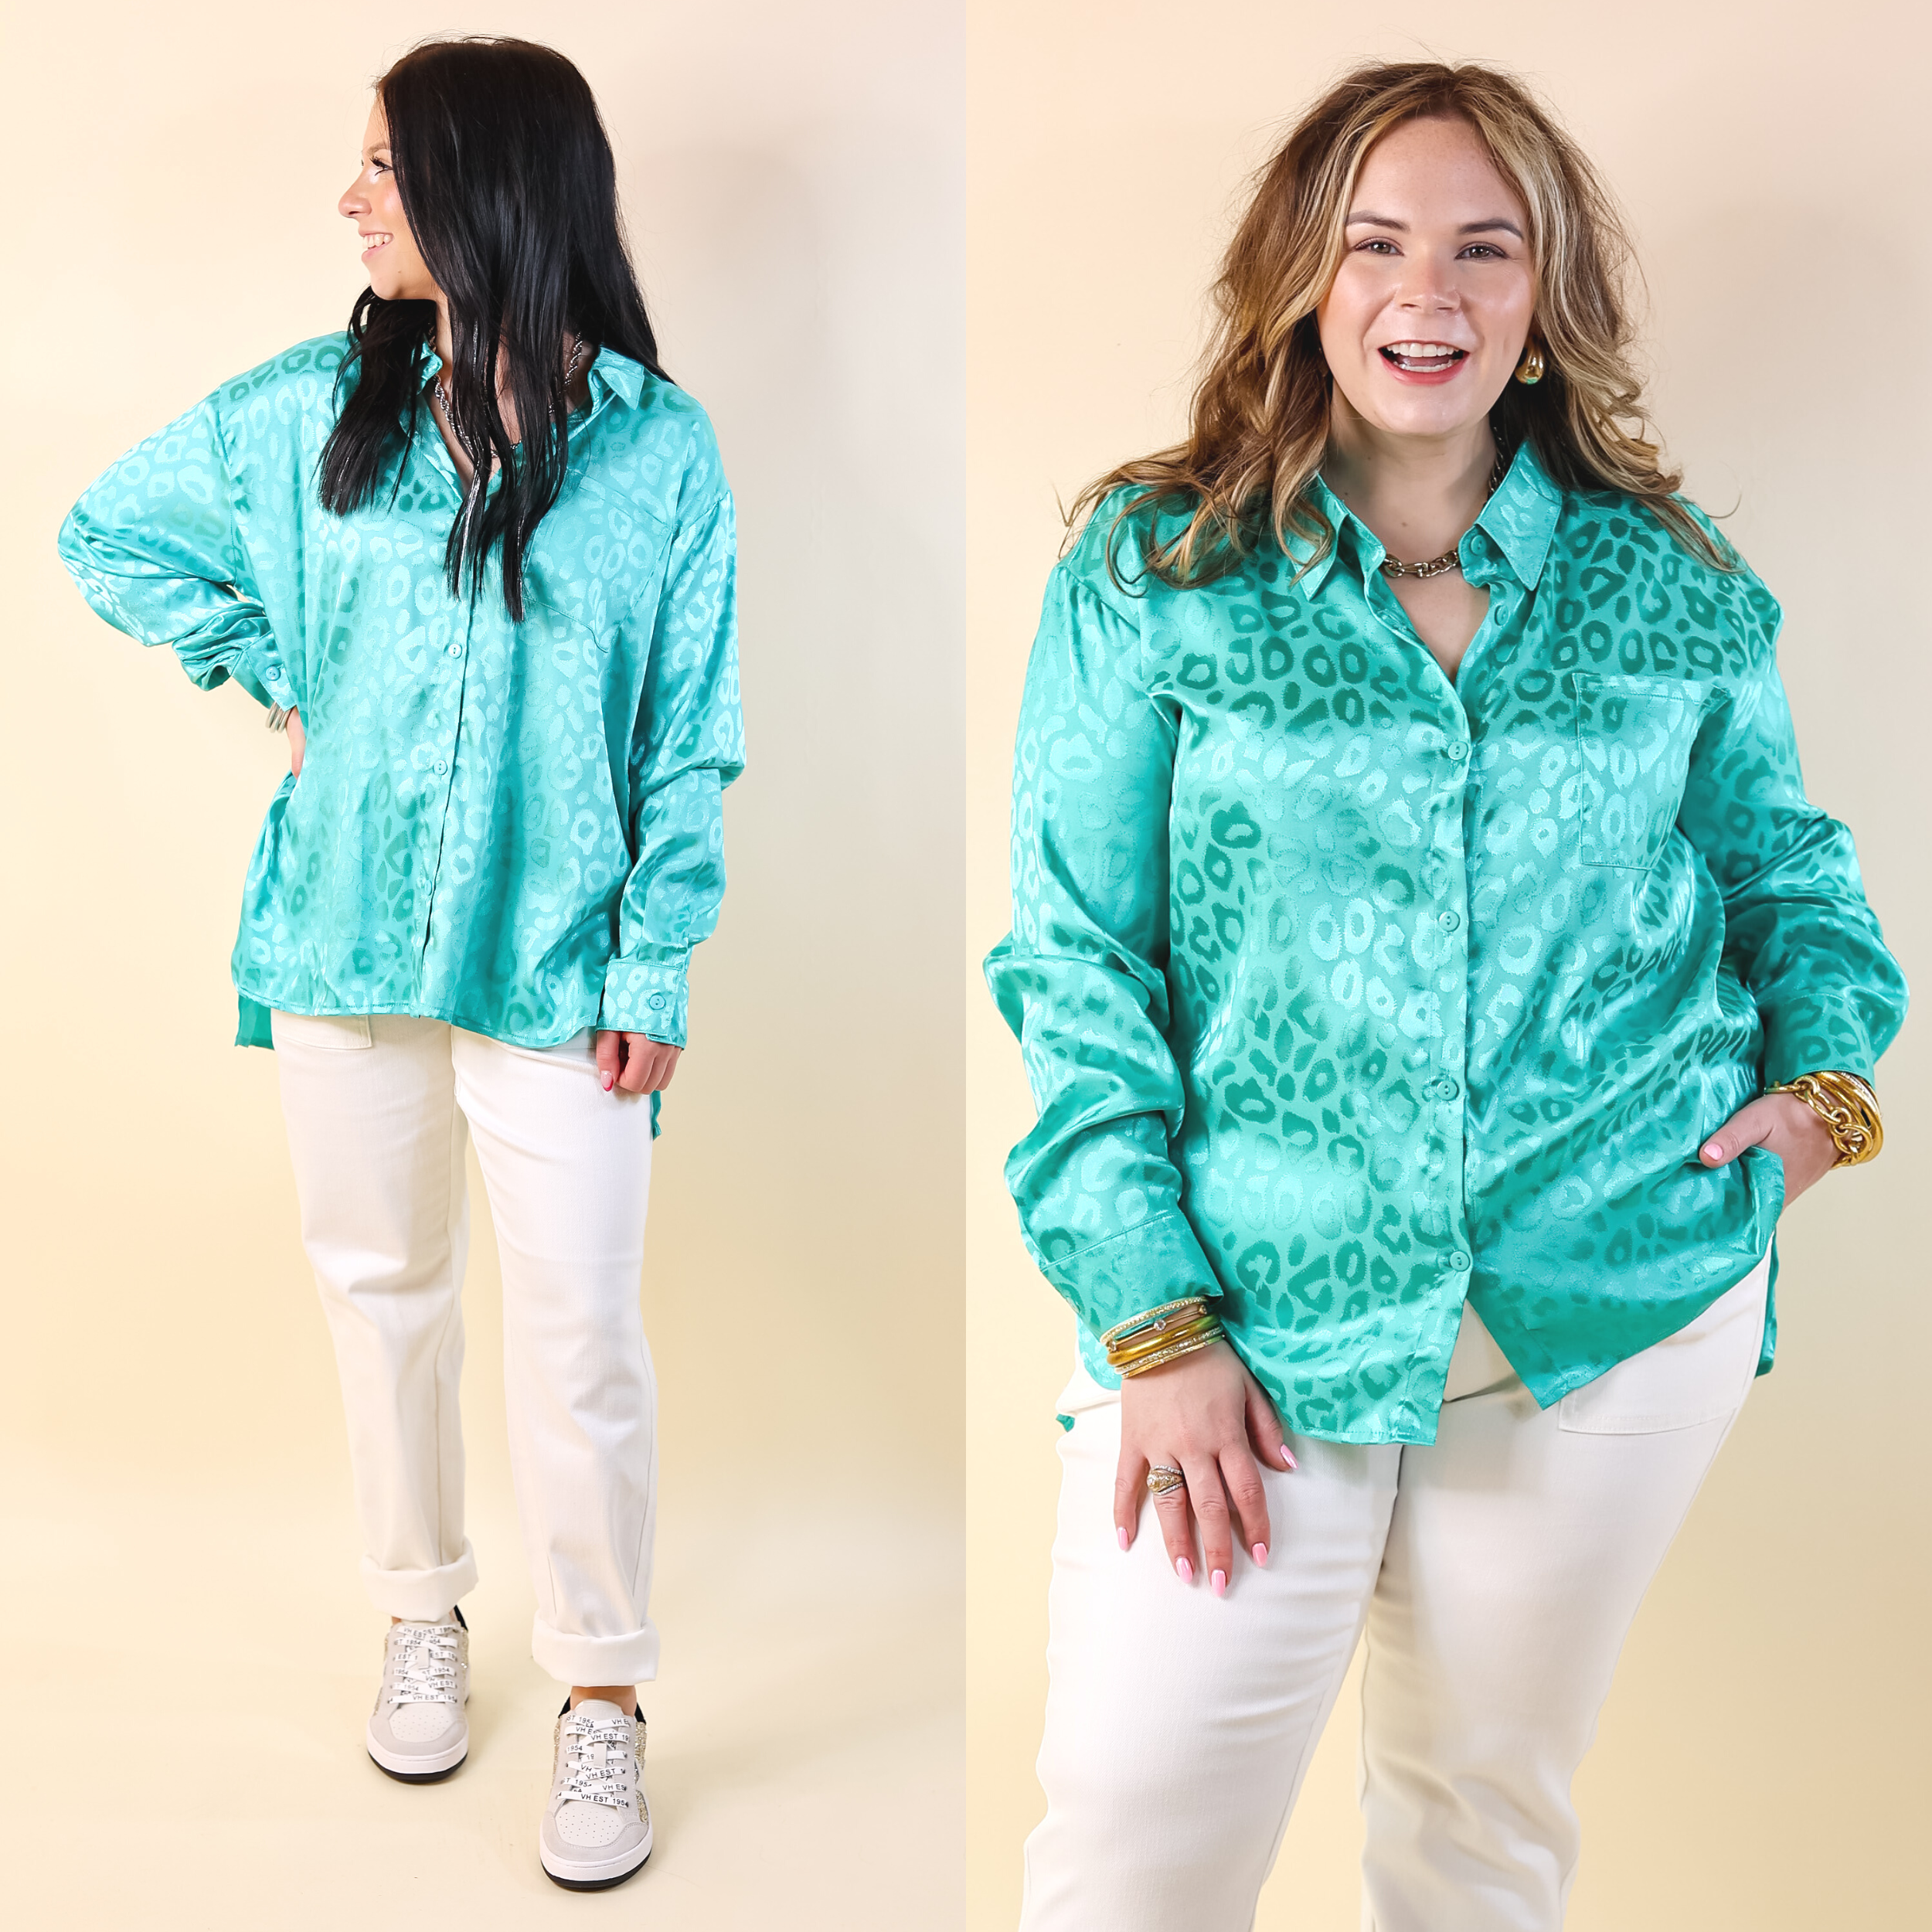 Top It Off Long Sleeve Button Up Satin Leopard Top in Turquoise Blue - Giddy Up Glamour Boutique